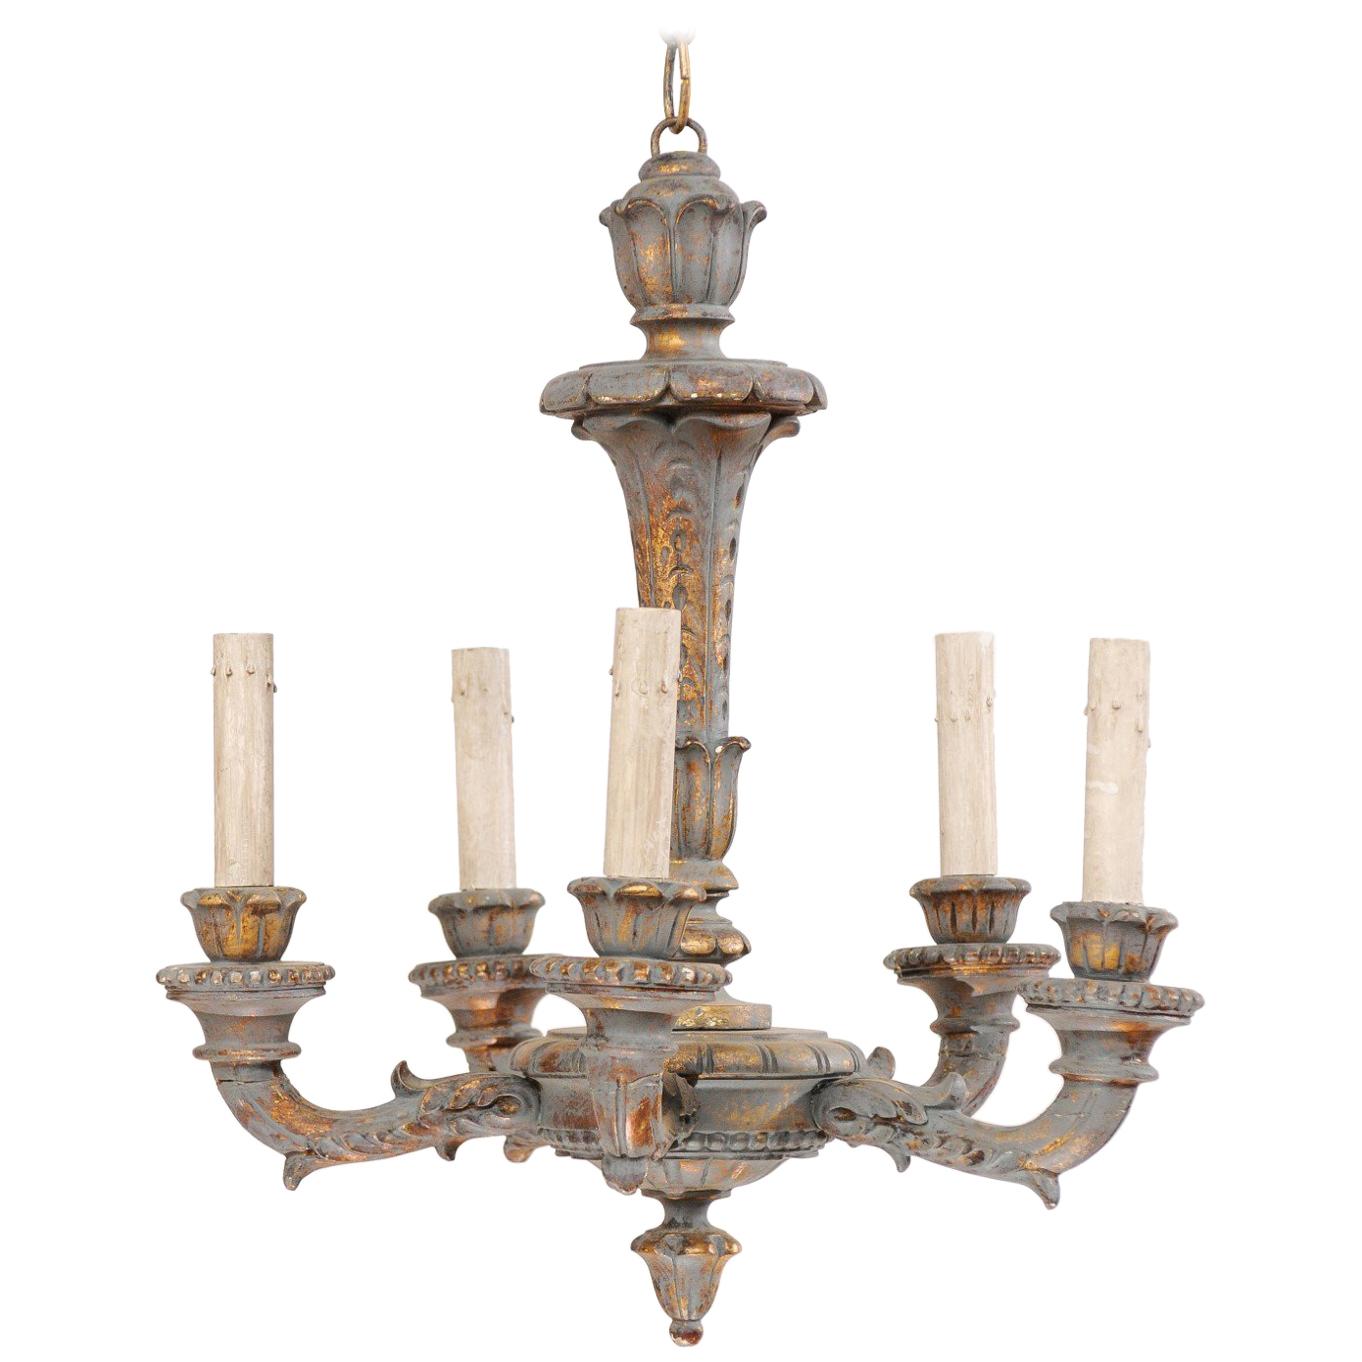 French 5-Light Painted and Carved Wood Chandelier in Grey-Blue with Gold Accents